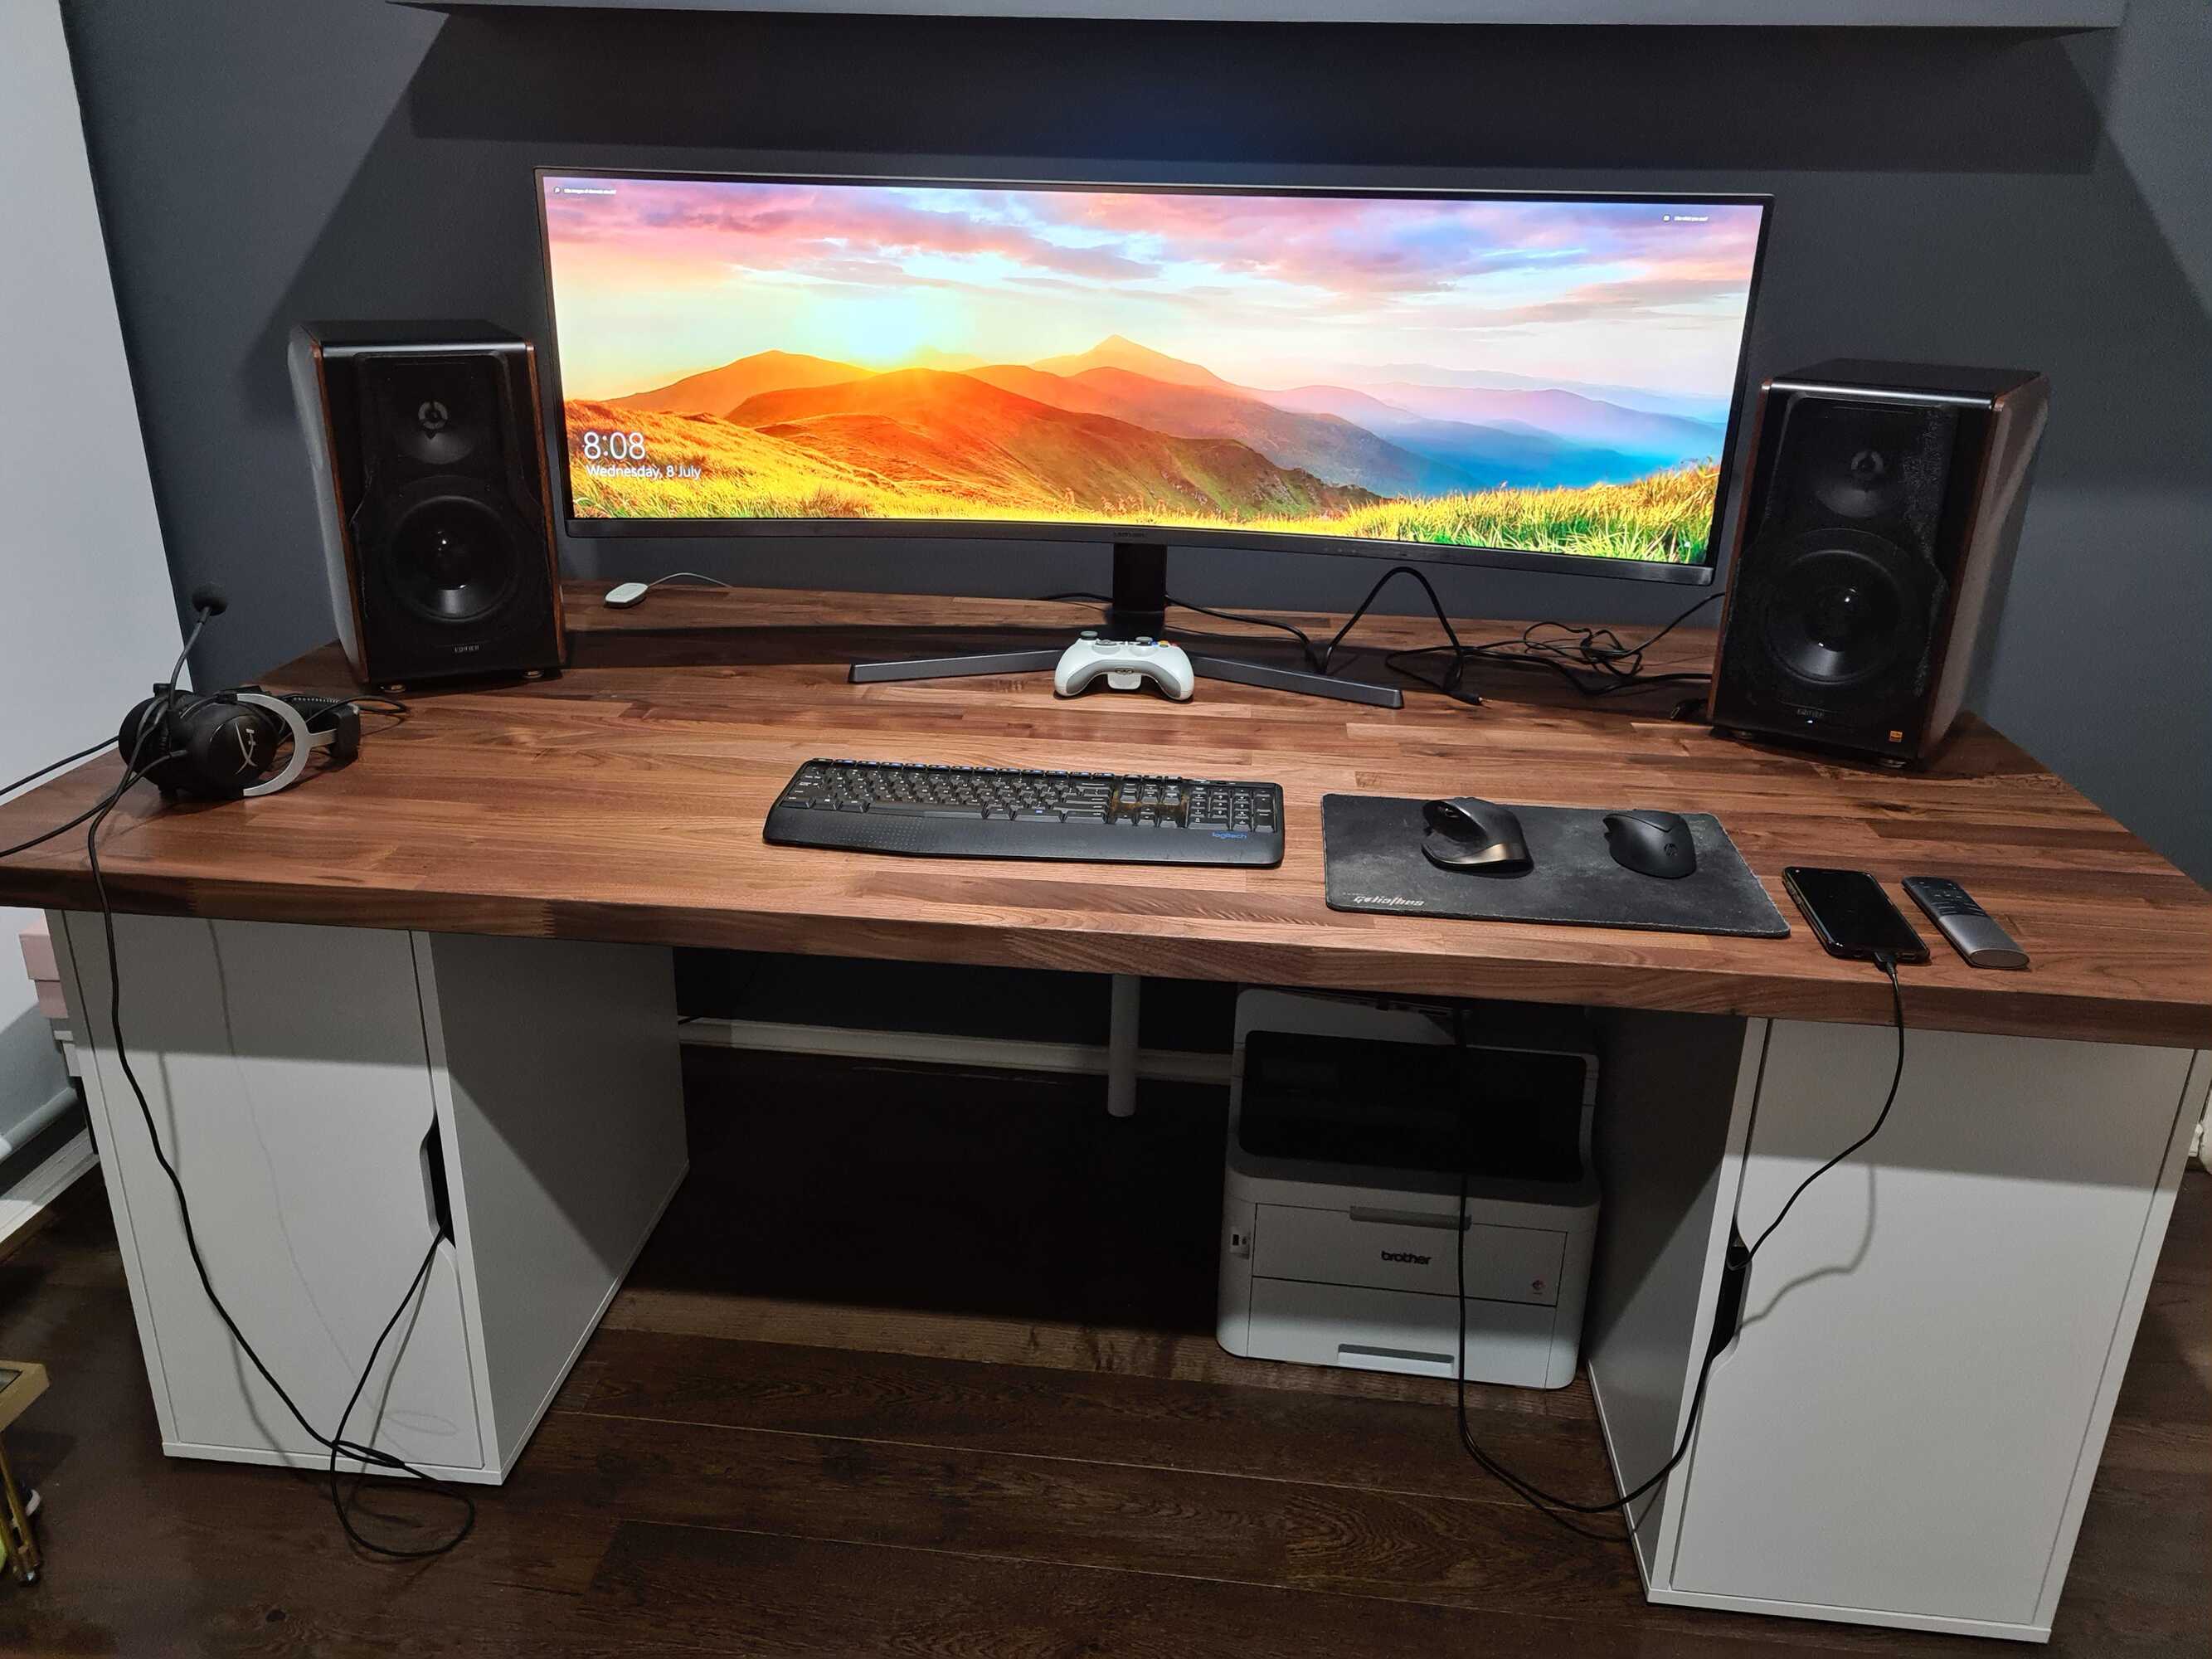 how-to-set-up-a-surround-sound-system-on-a-pc